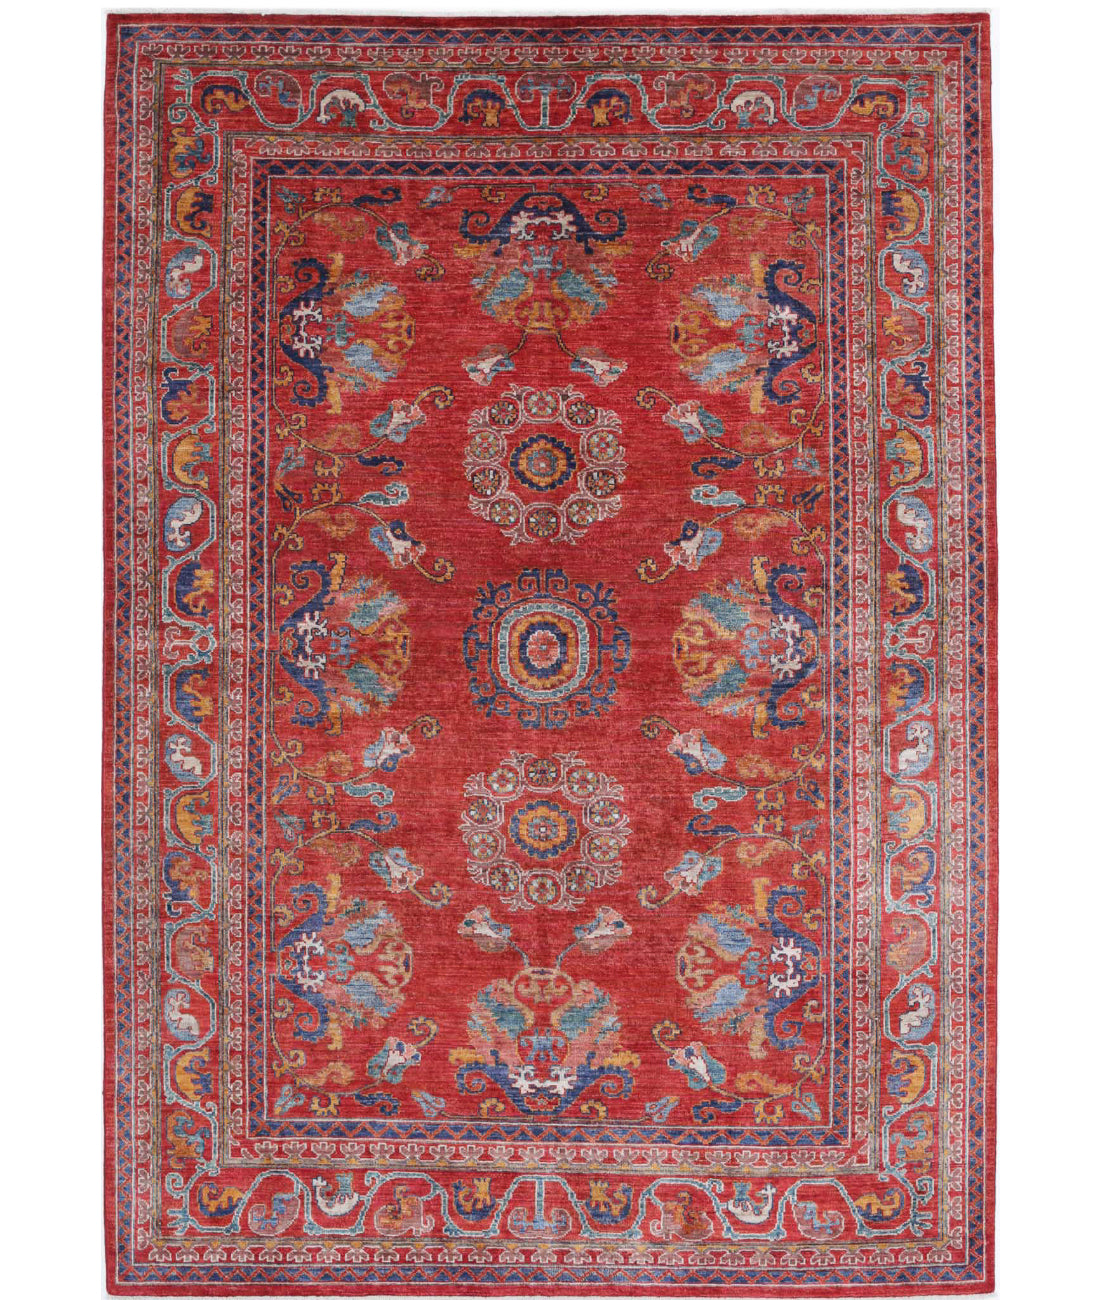 Hand Knotted Nomadic Caucasian Humna Wool Rug - 5'11'' x 8'10'' 5'11'' x 8'10'' (178 X 265) / Red / N/A